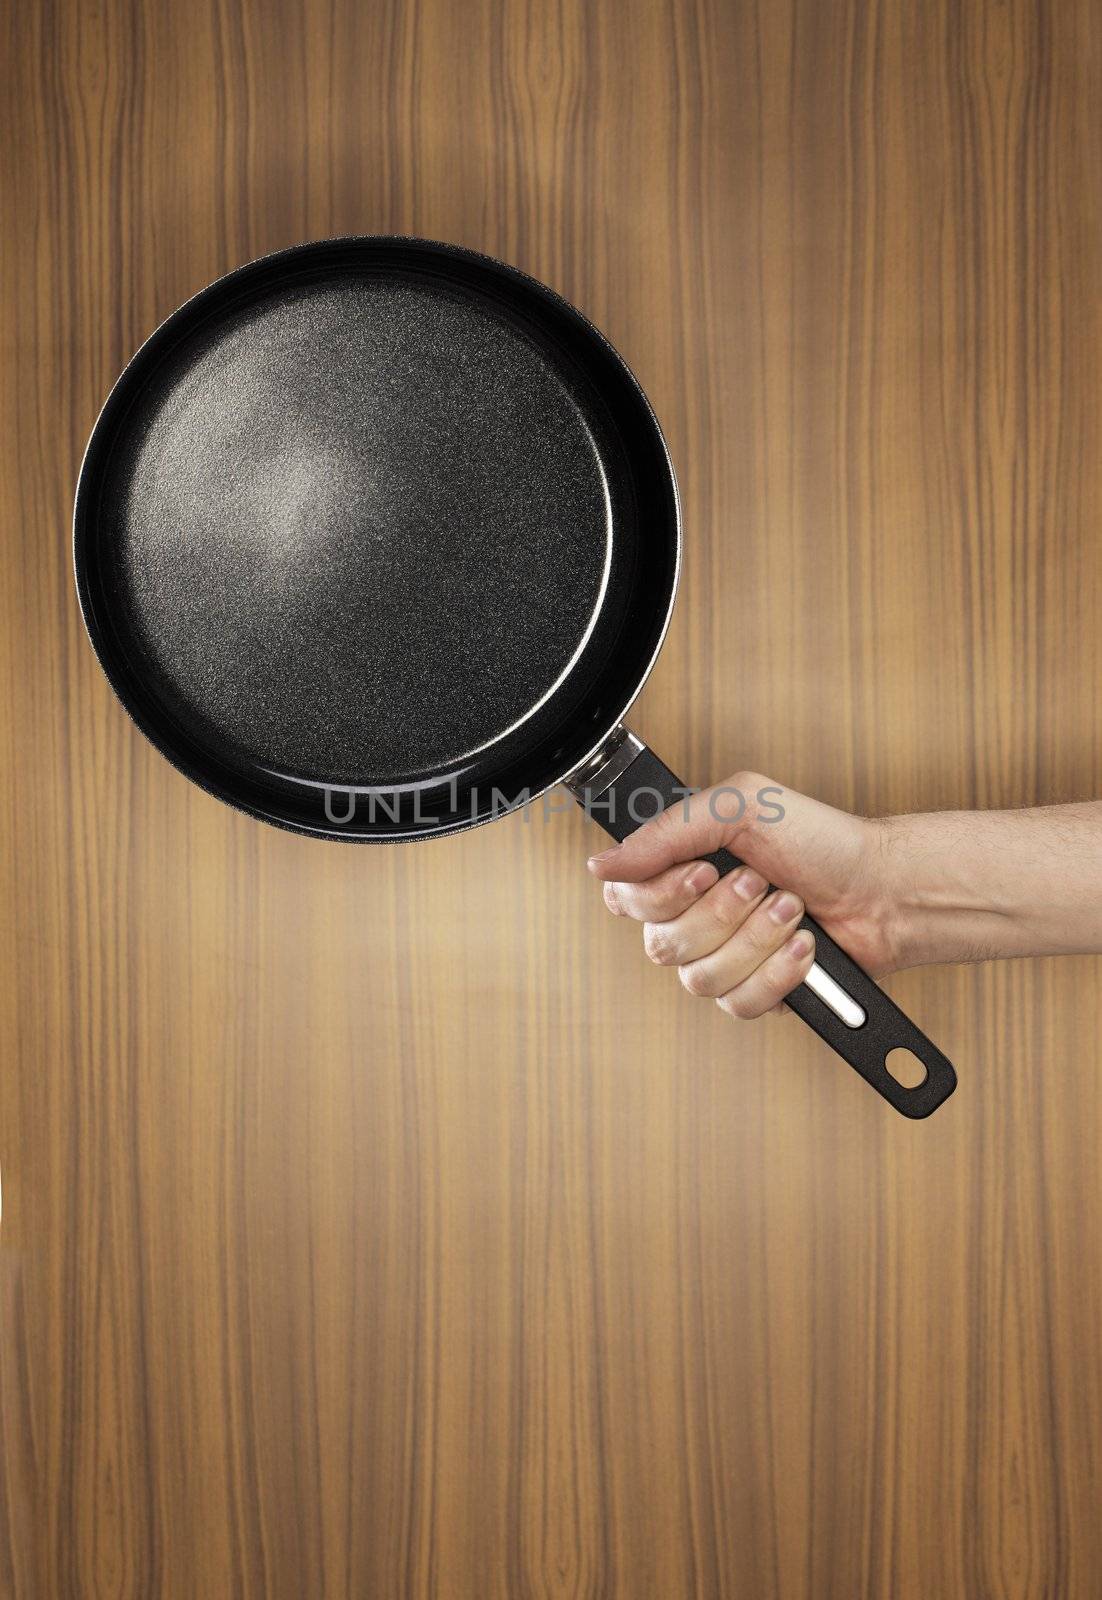 Man holding a saucepan which has a ceramic non-stick coating